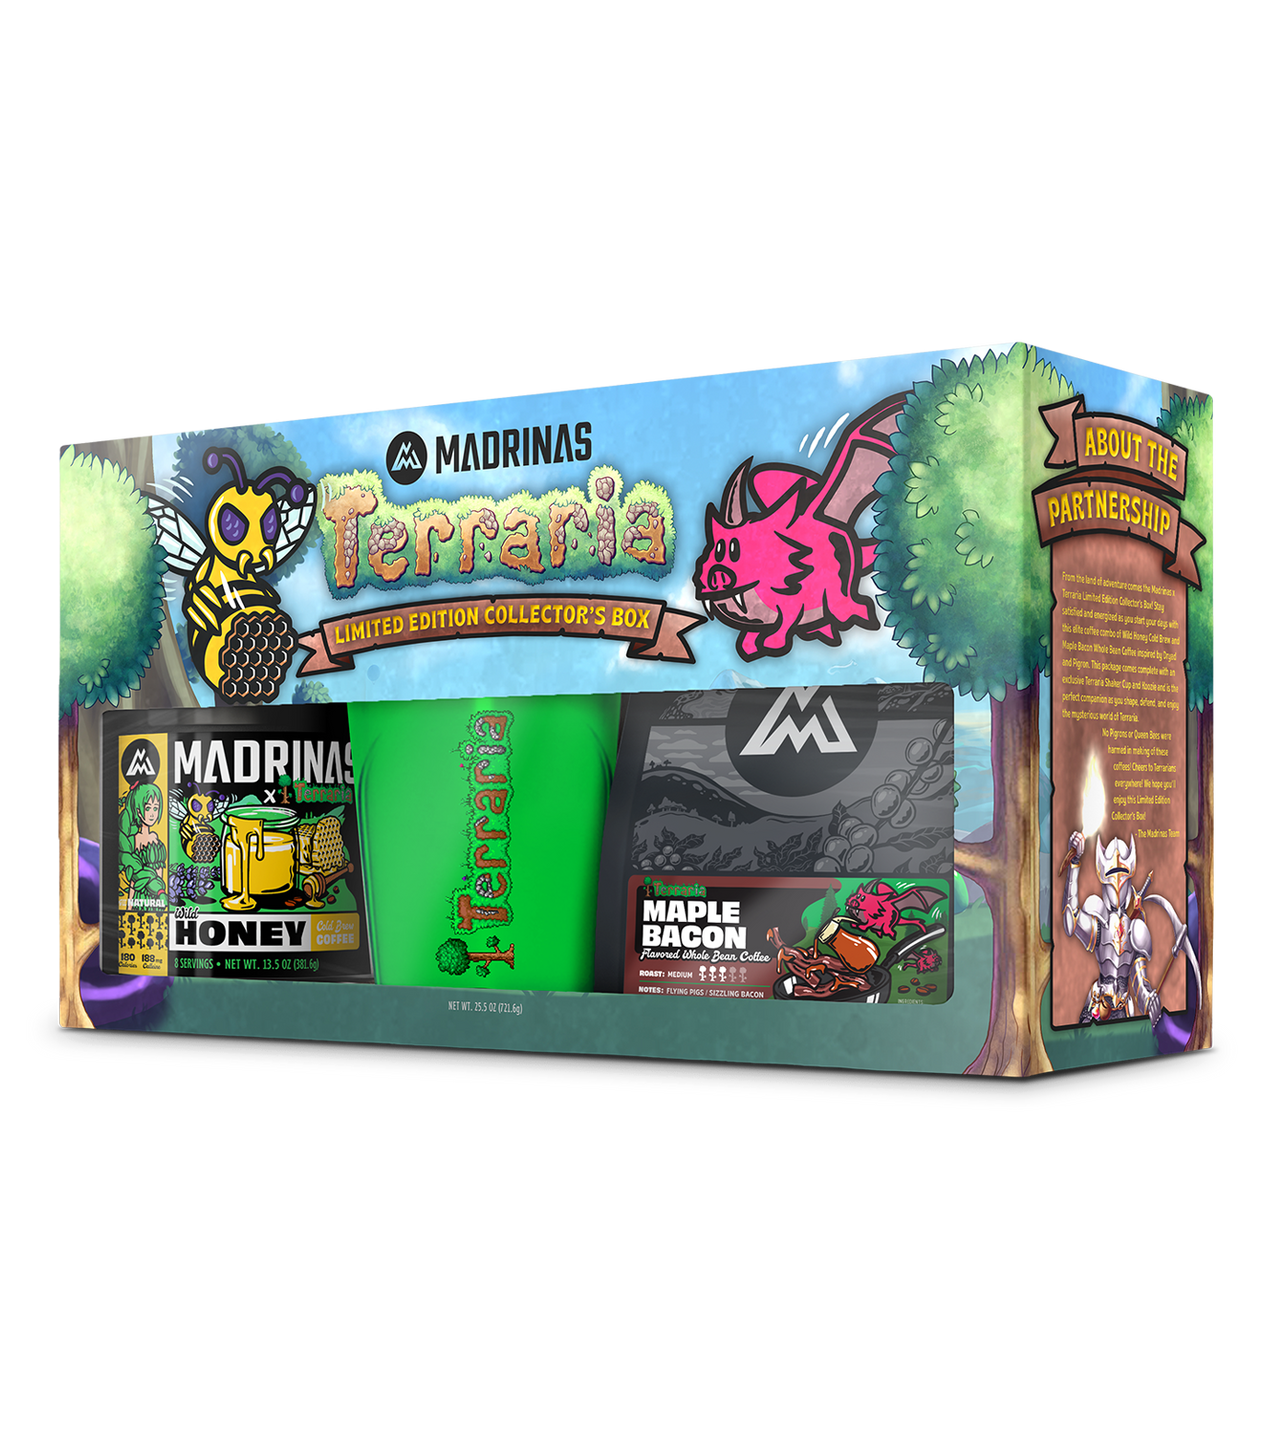 Terraria Limited Edition